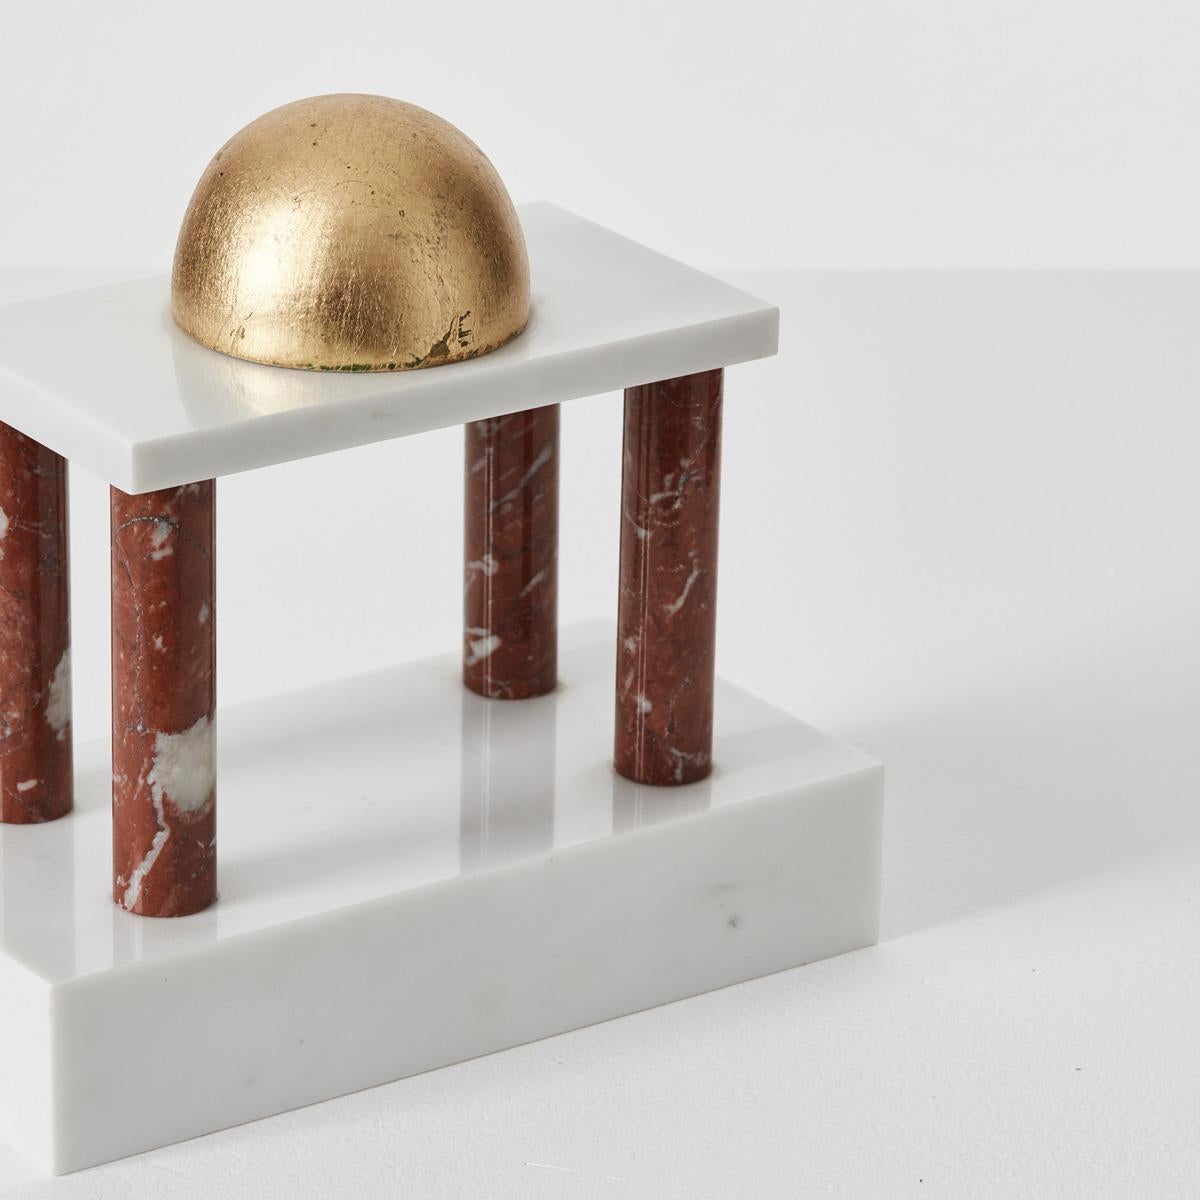 Late 20th Century Architectural Sculpture by Sottsass for Ultima Edizione, Italy 1986 For Sale